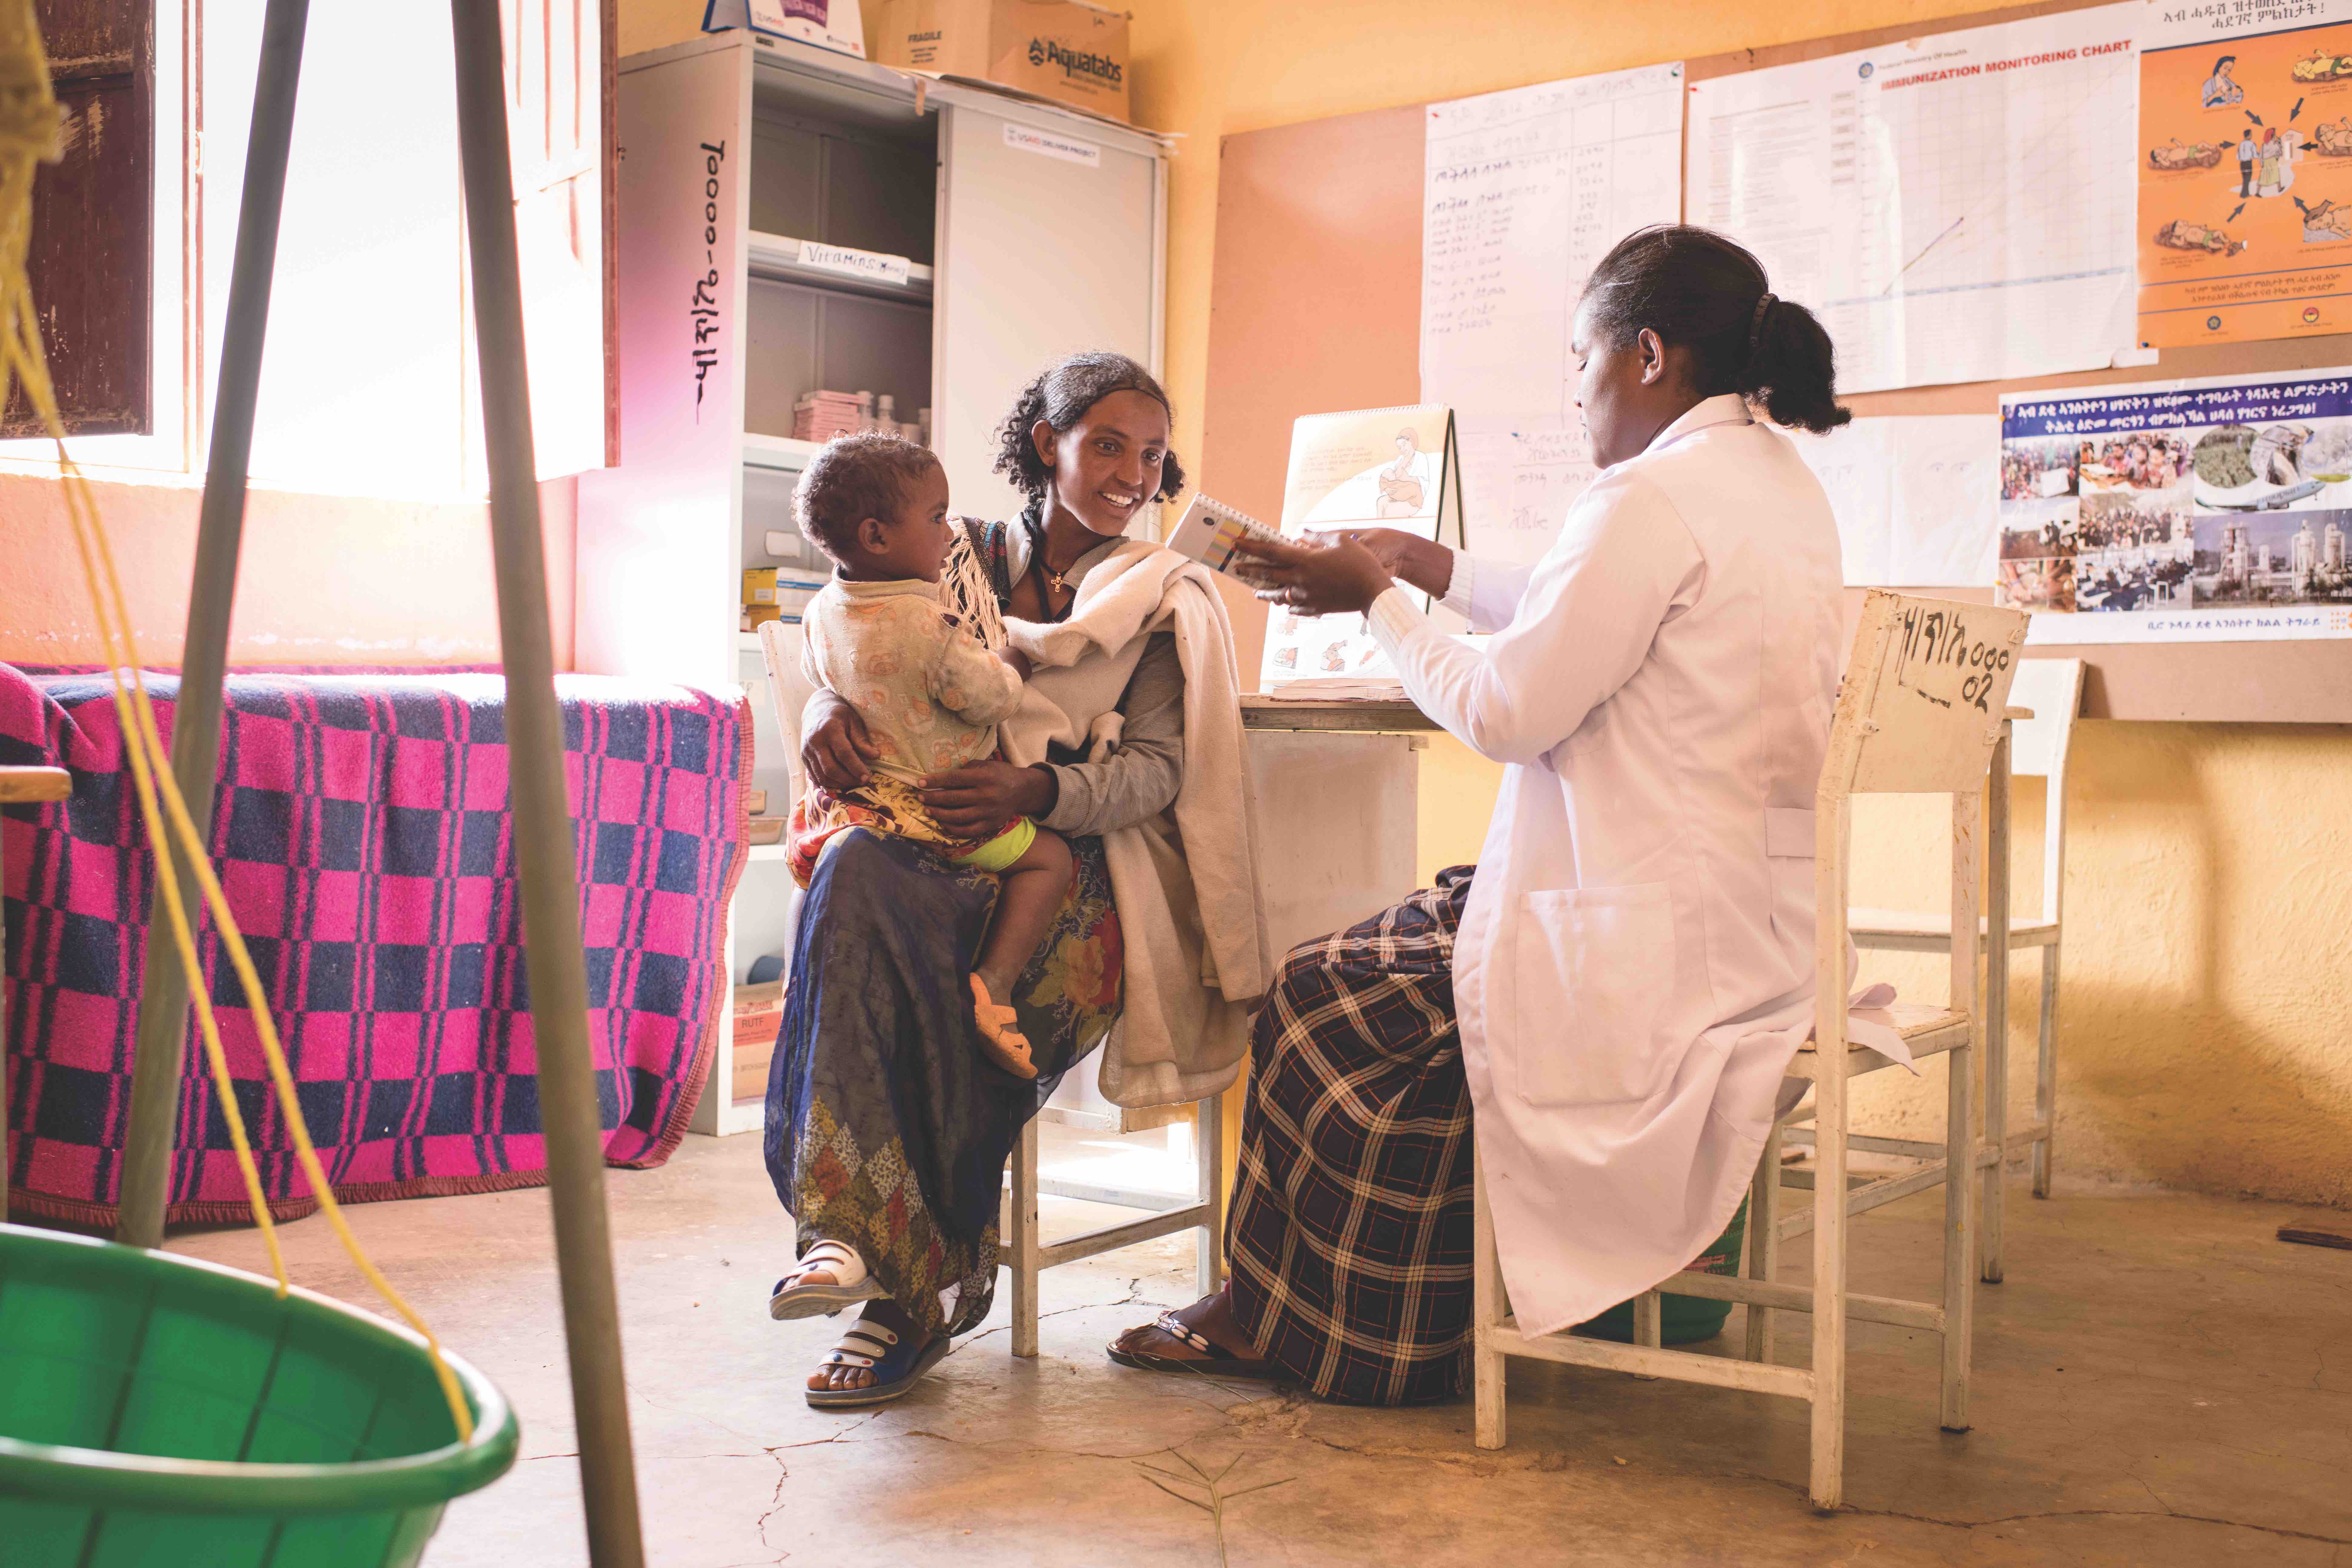 JSI Celebrates Helping Expand Access to Health Services for 17 Million Ethiopians